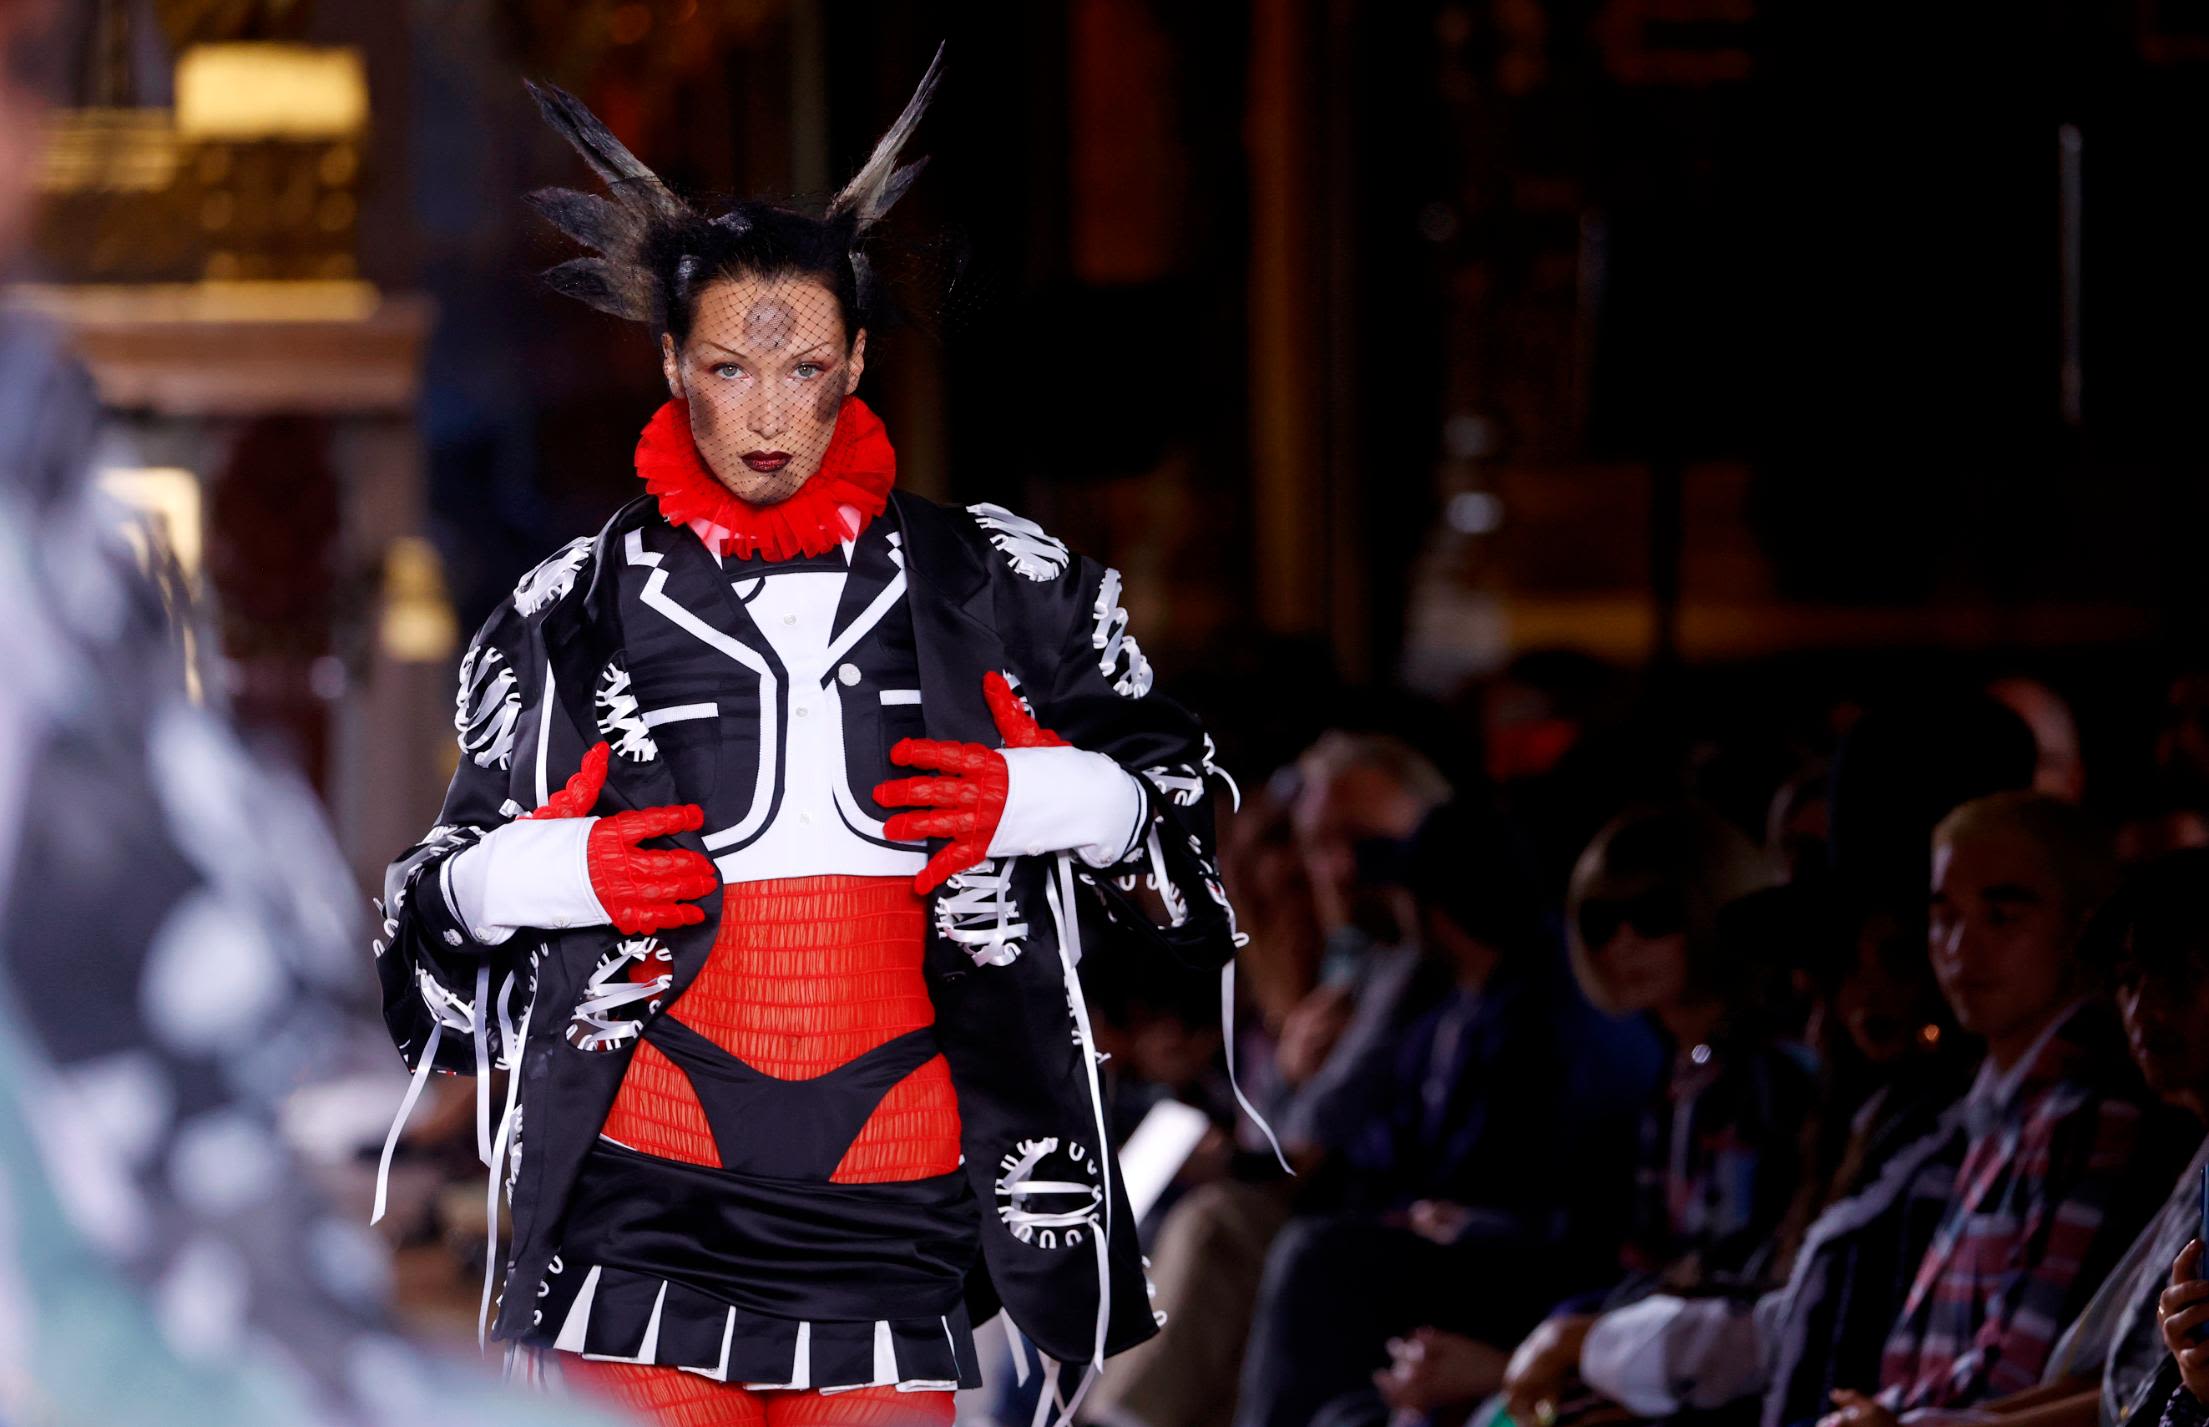 Paris Fashion Week: 11 standout moments from the Spring-Summer